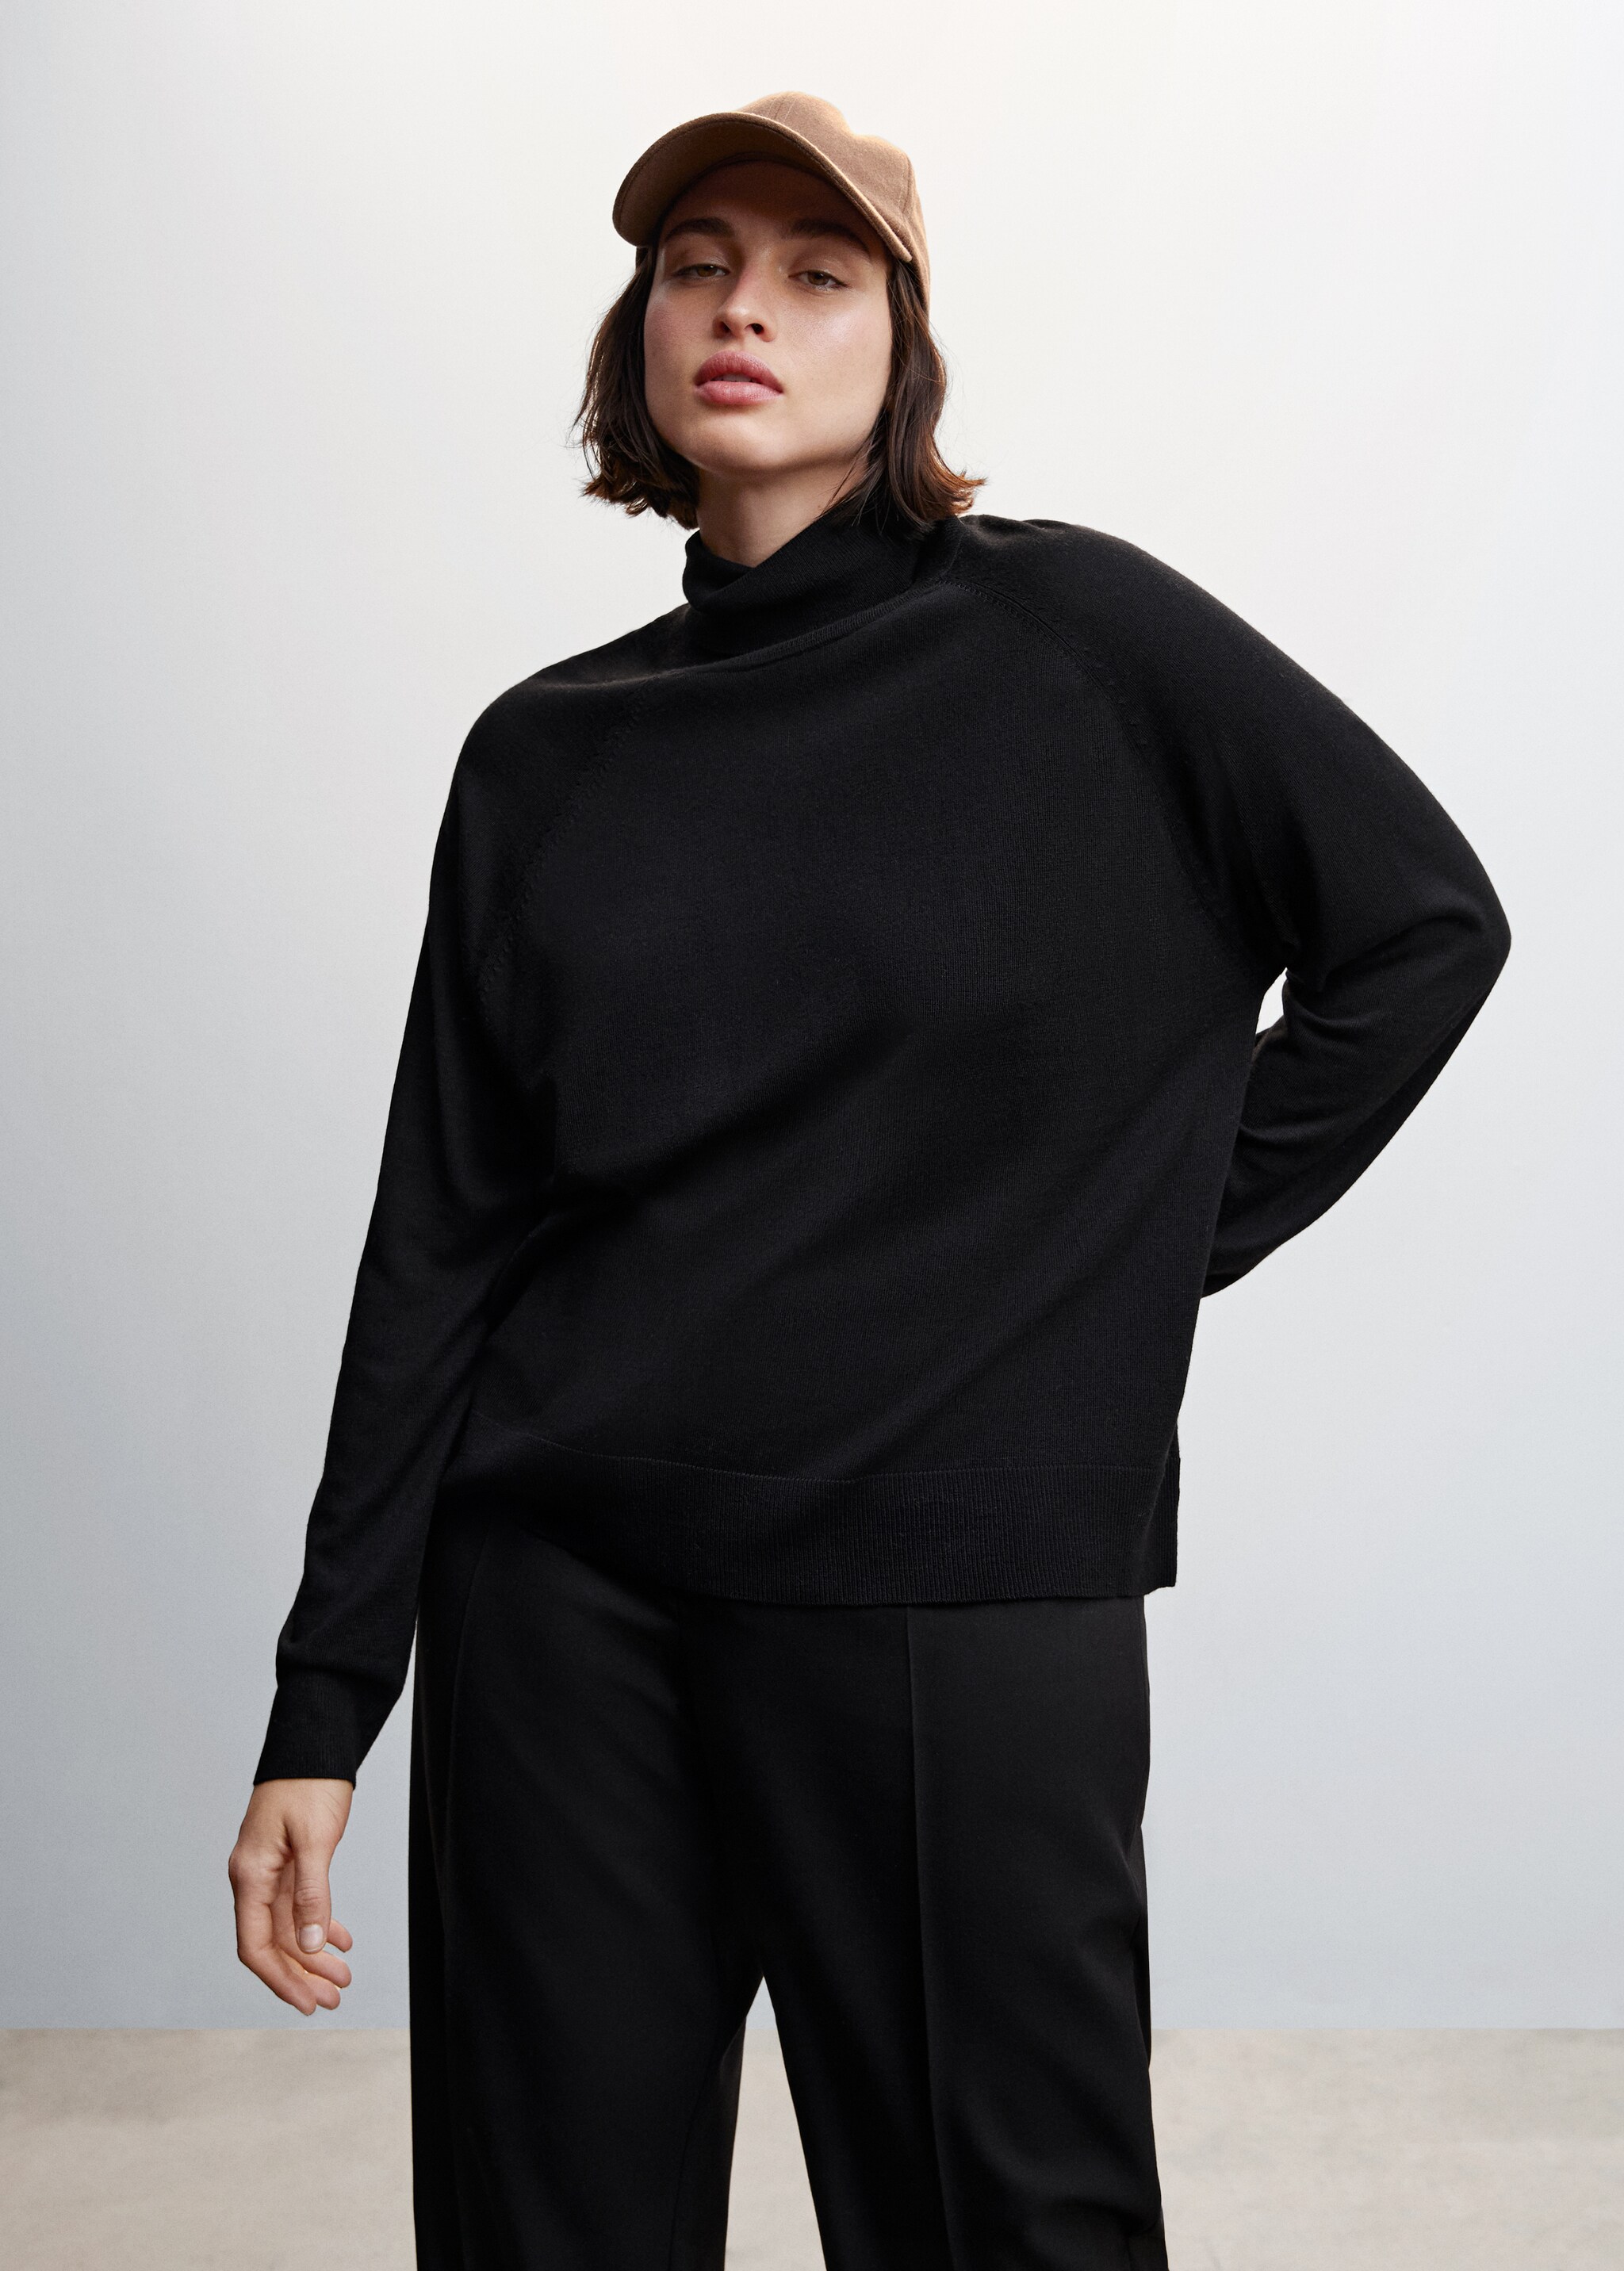 Fine-knit turtleneck sweater - Details of the article 5